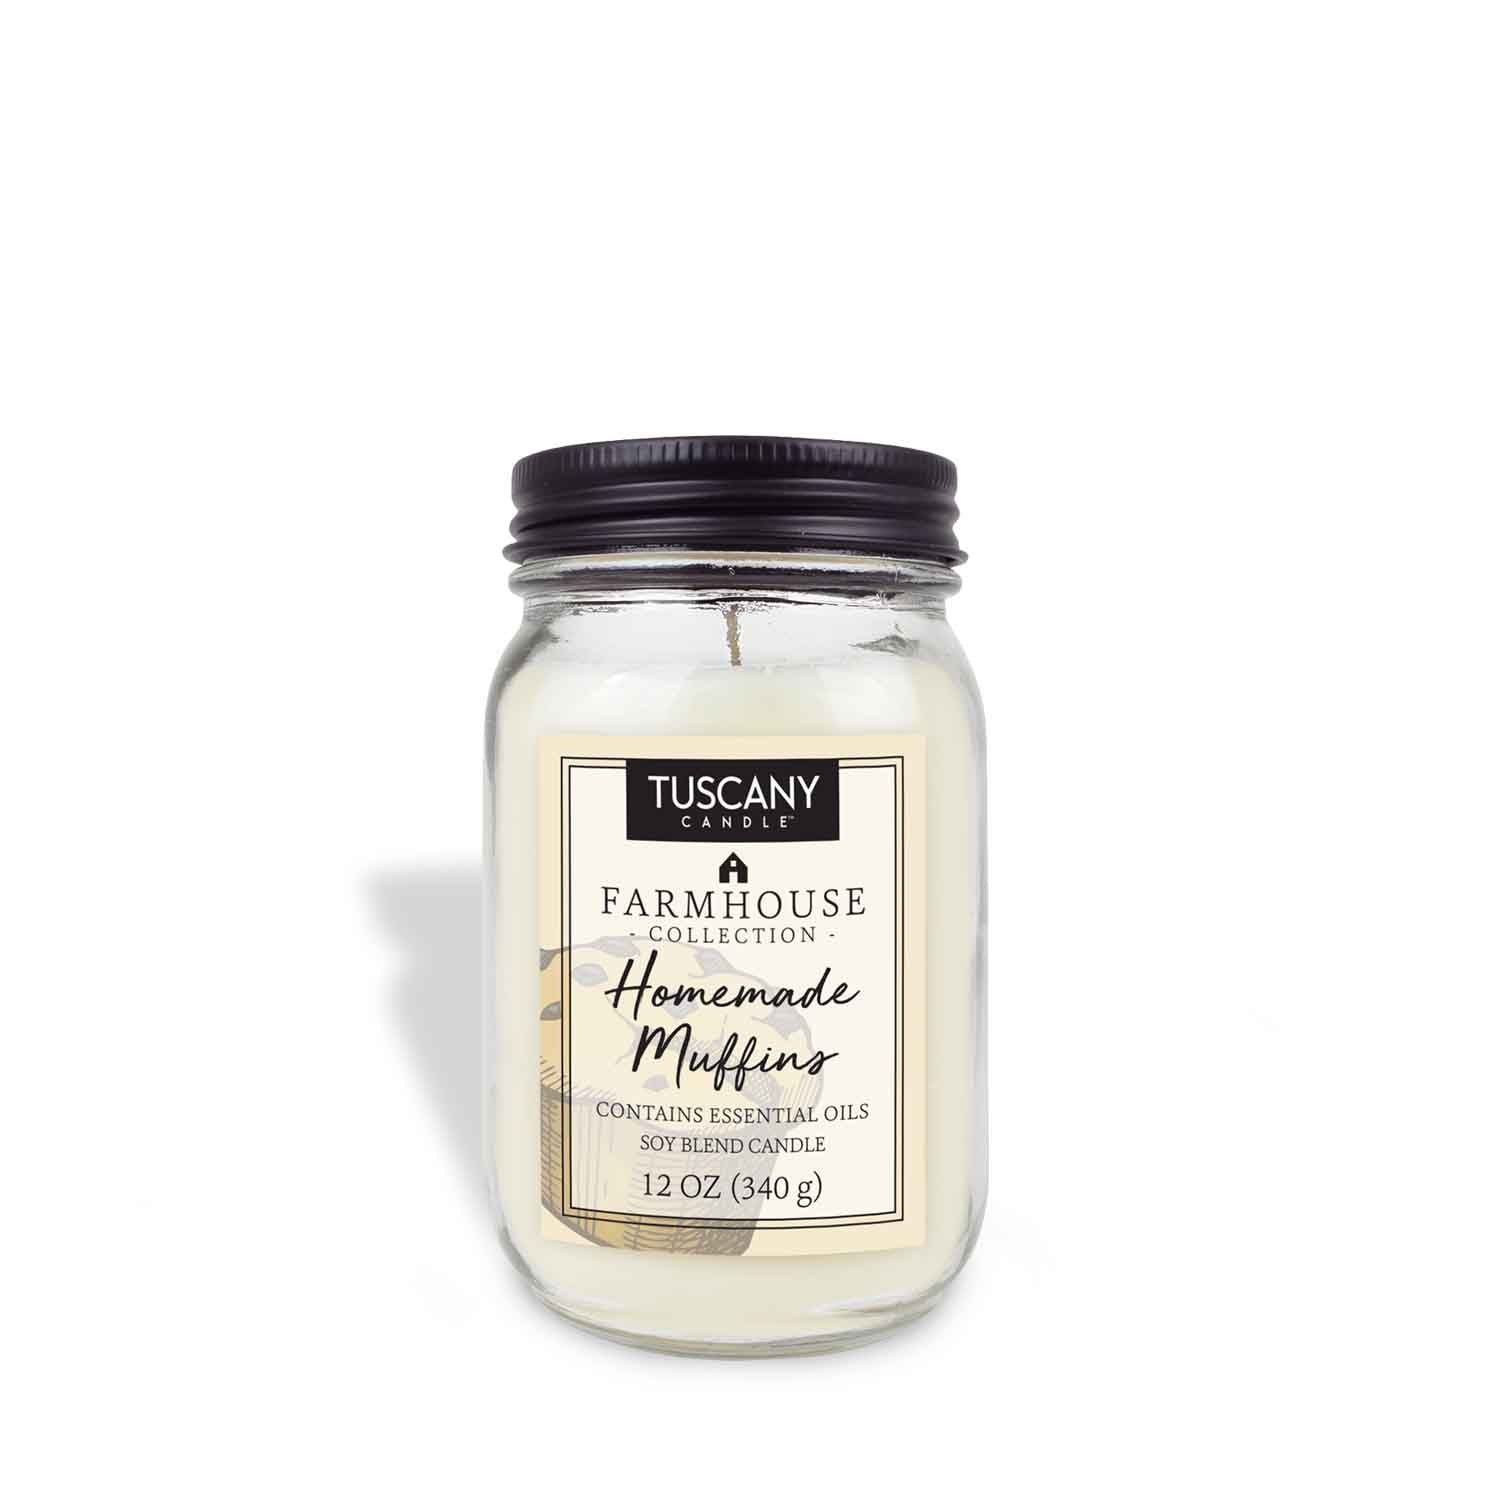 A Homemade Muffins Scented Jar Candle (12 oz) from the Farmhouse Collection by Tuscany Candle® EVD with a candle on it.